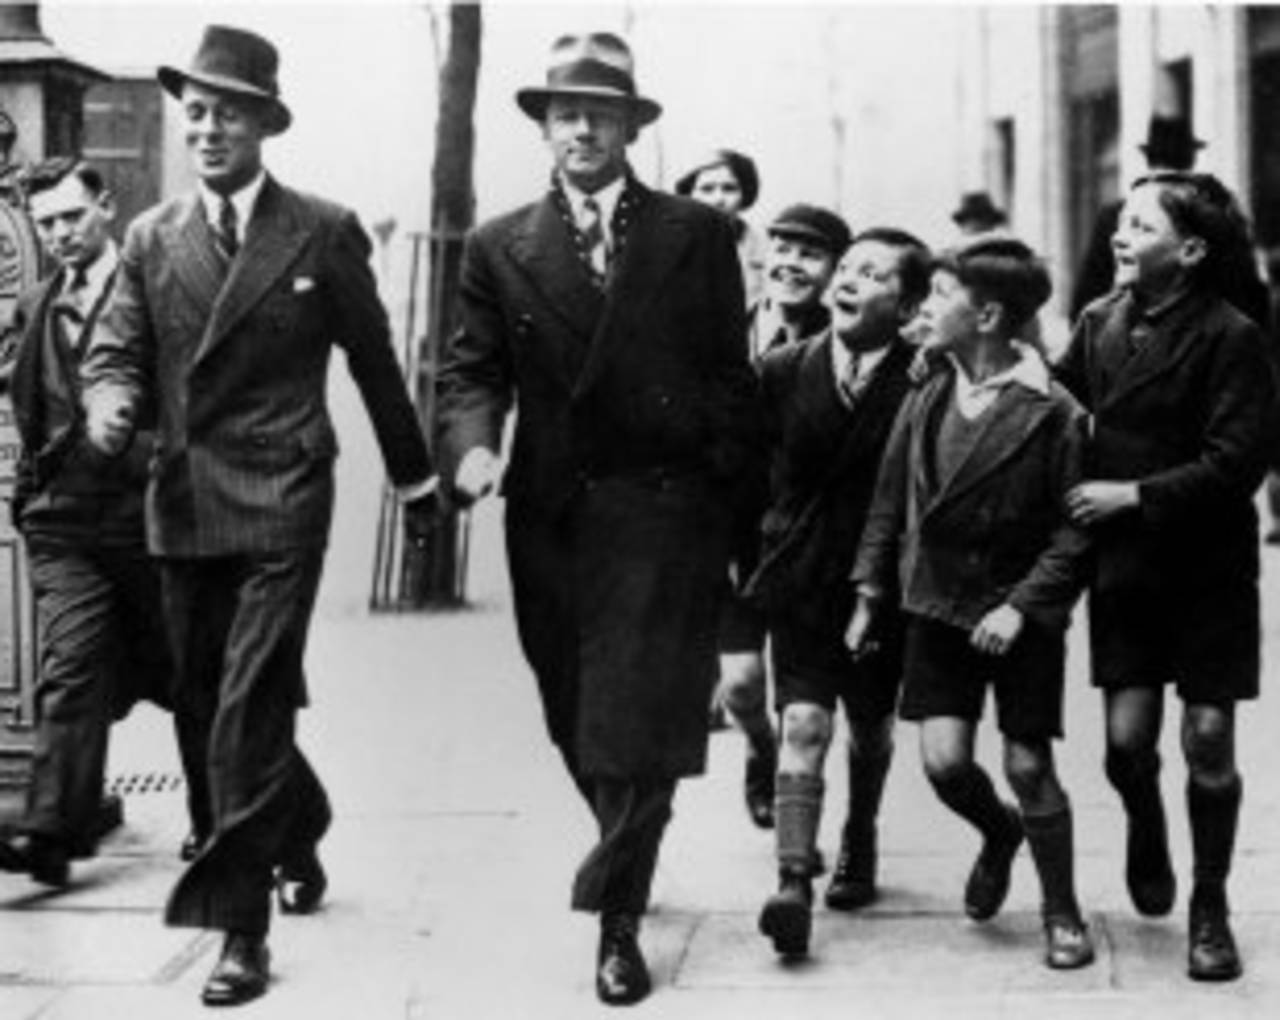 Don Bradman walks down Strand with a group of children following him, 1938